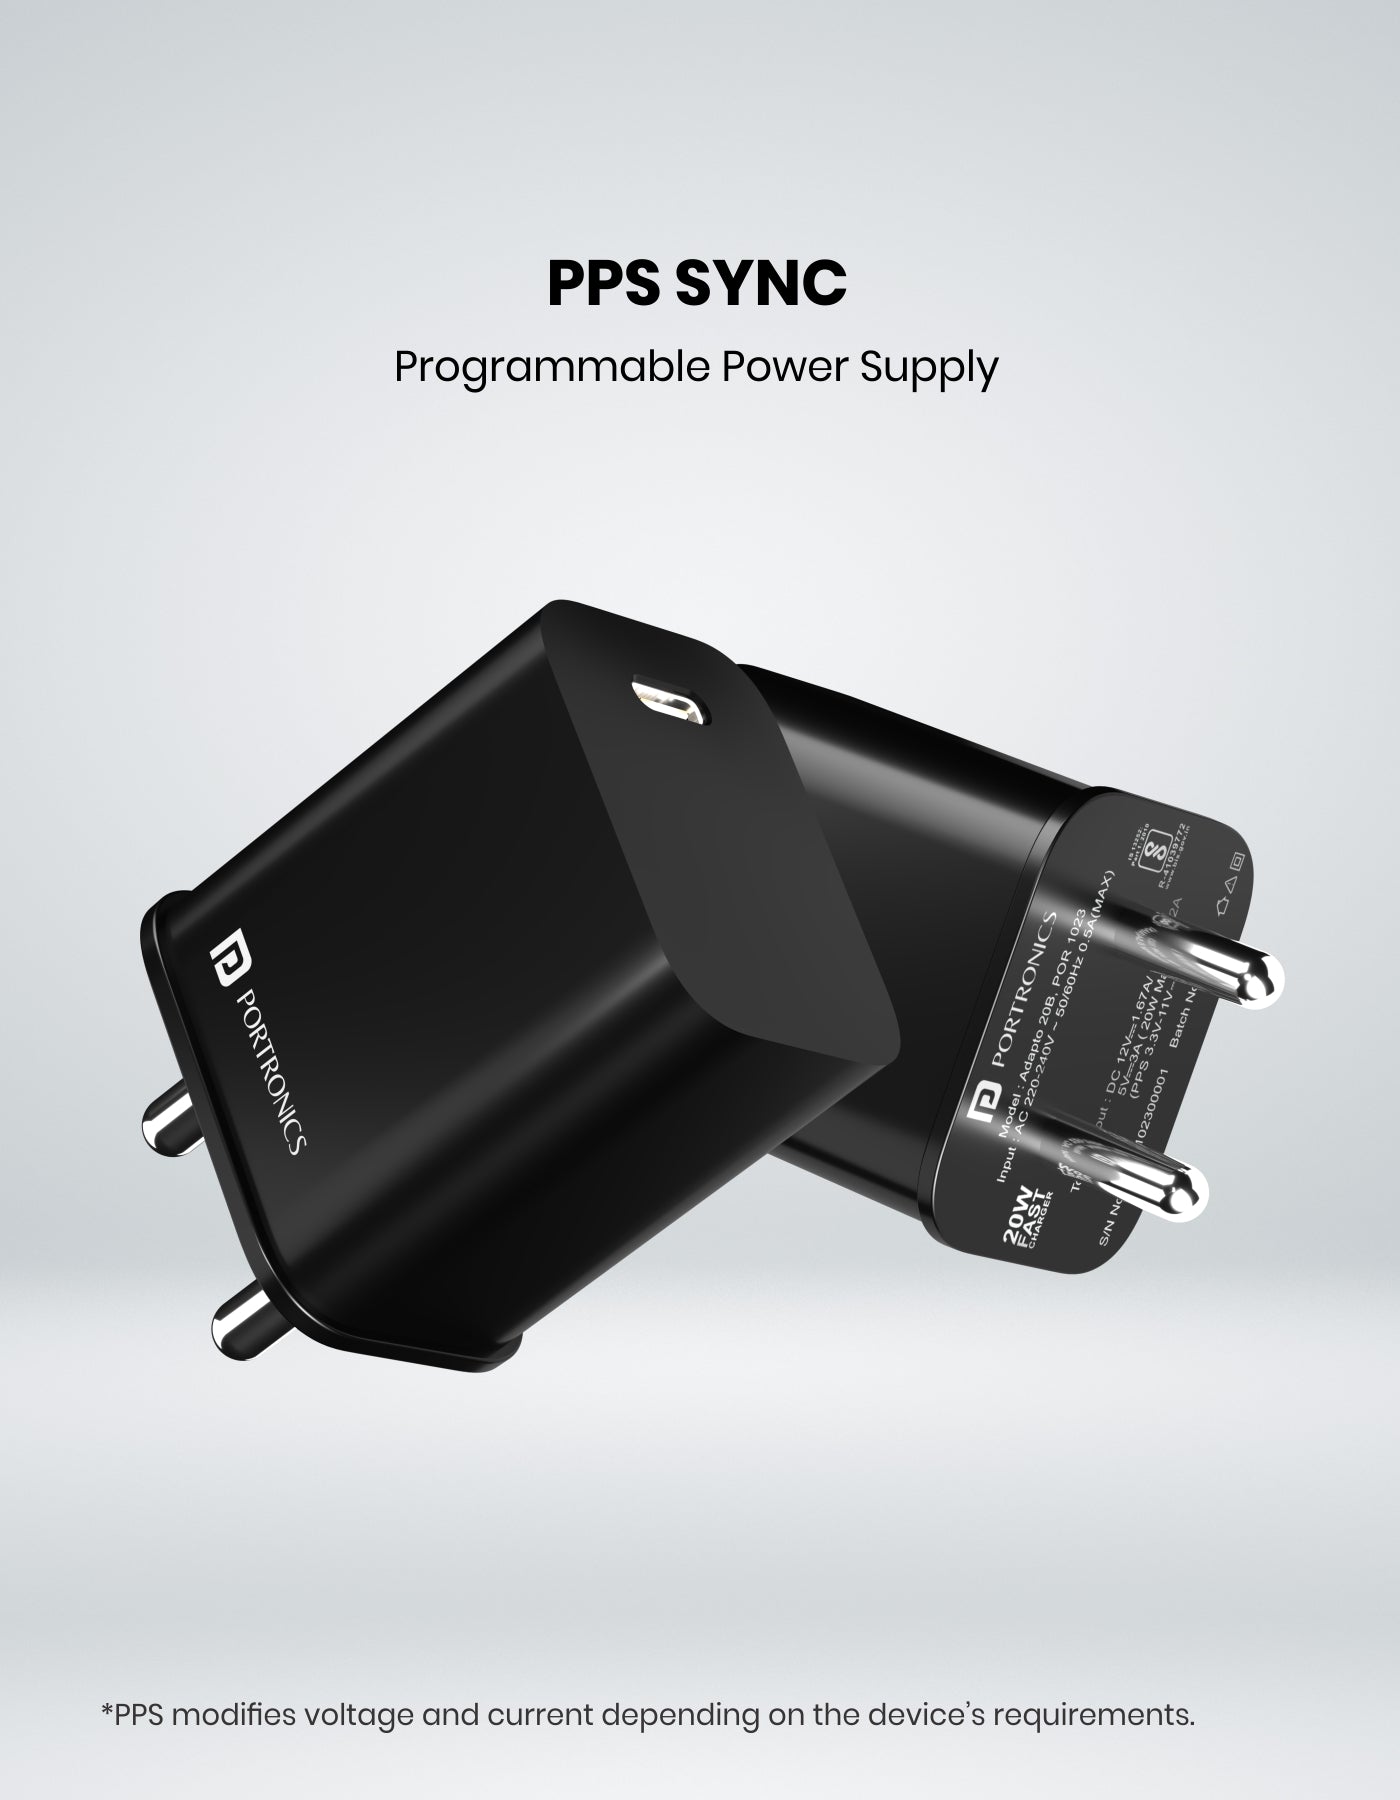 Adapto 20 - 20W Type-C PD Charger/Adapter perfect compact size